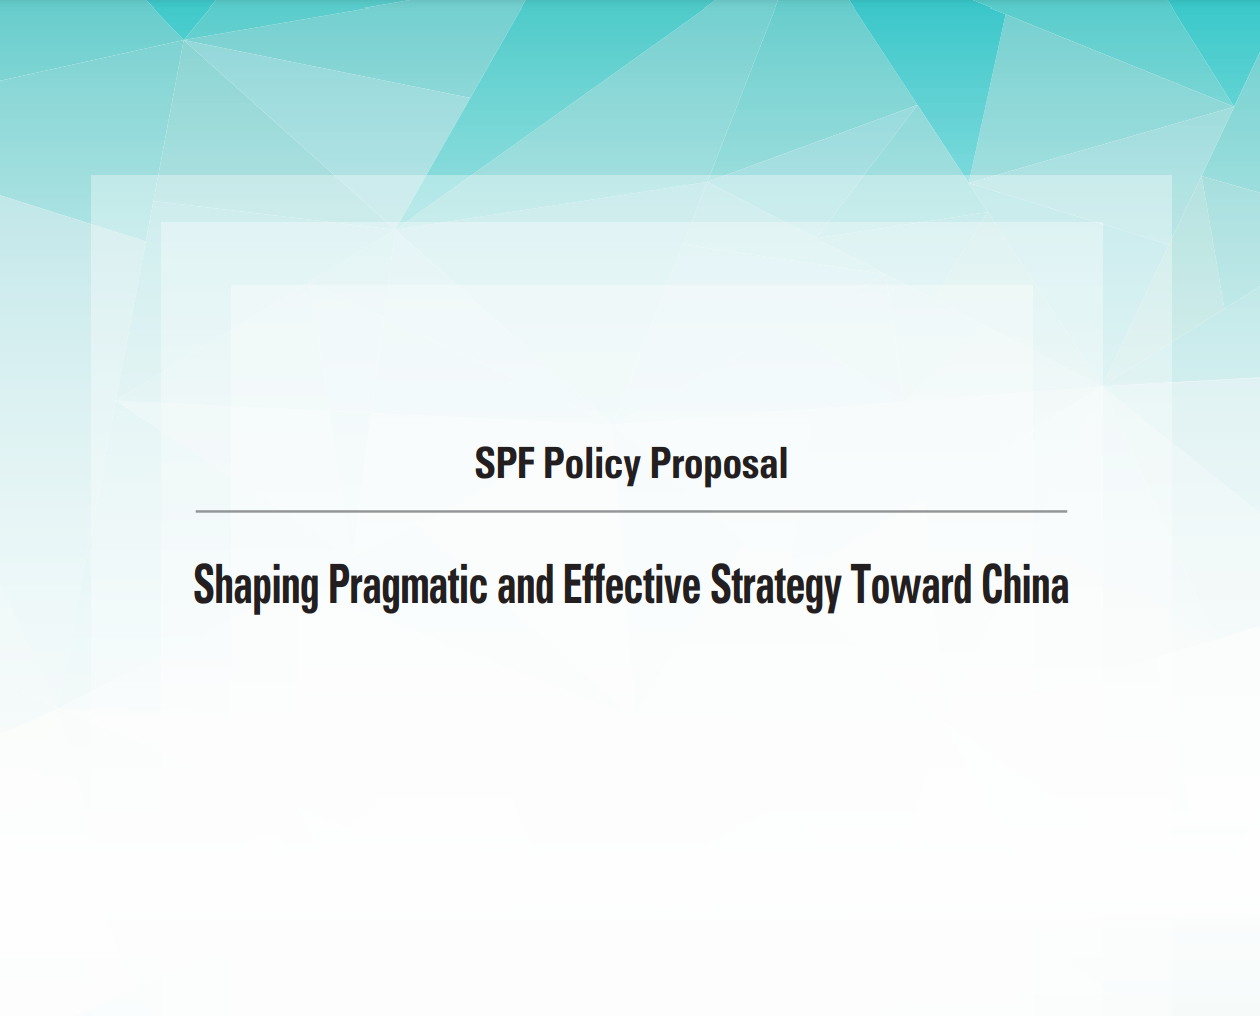 SPF Policy Proposal: Shaping Pragmatic and Effective Strategy Toward China